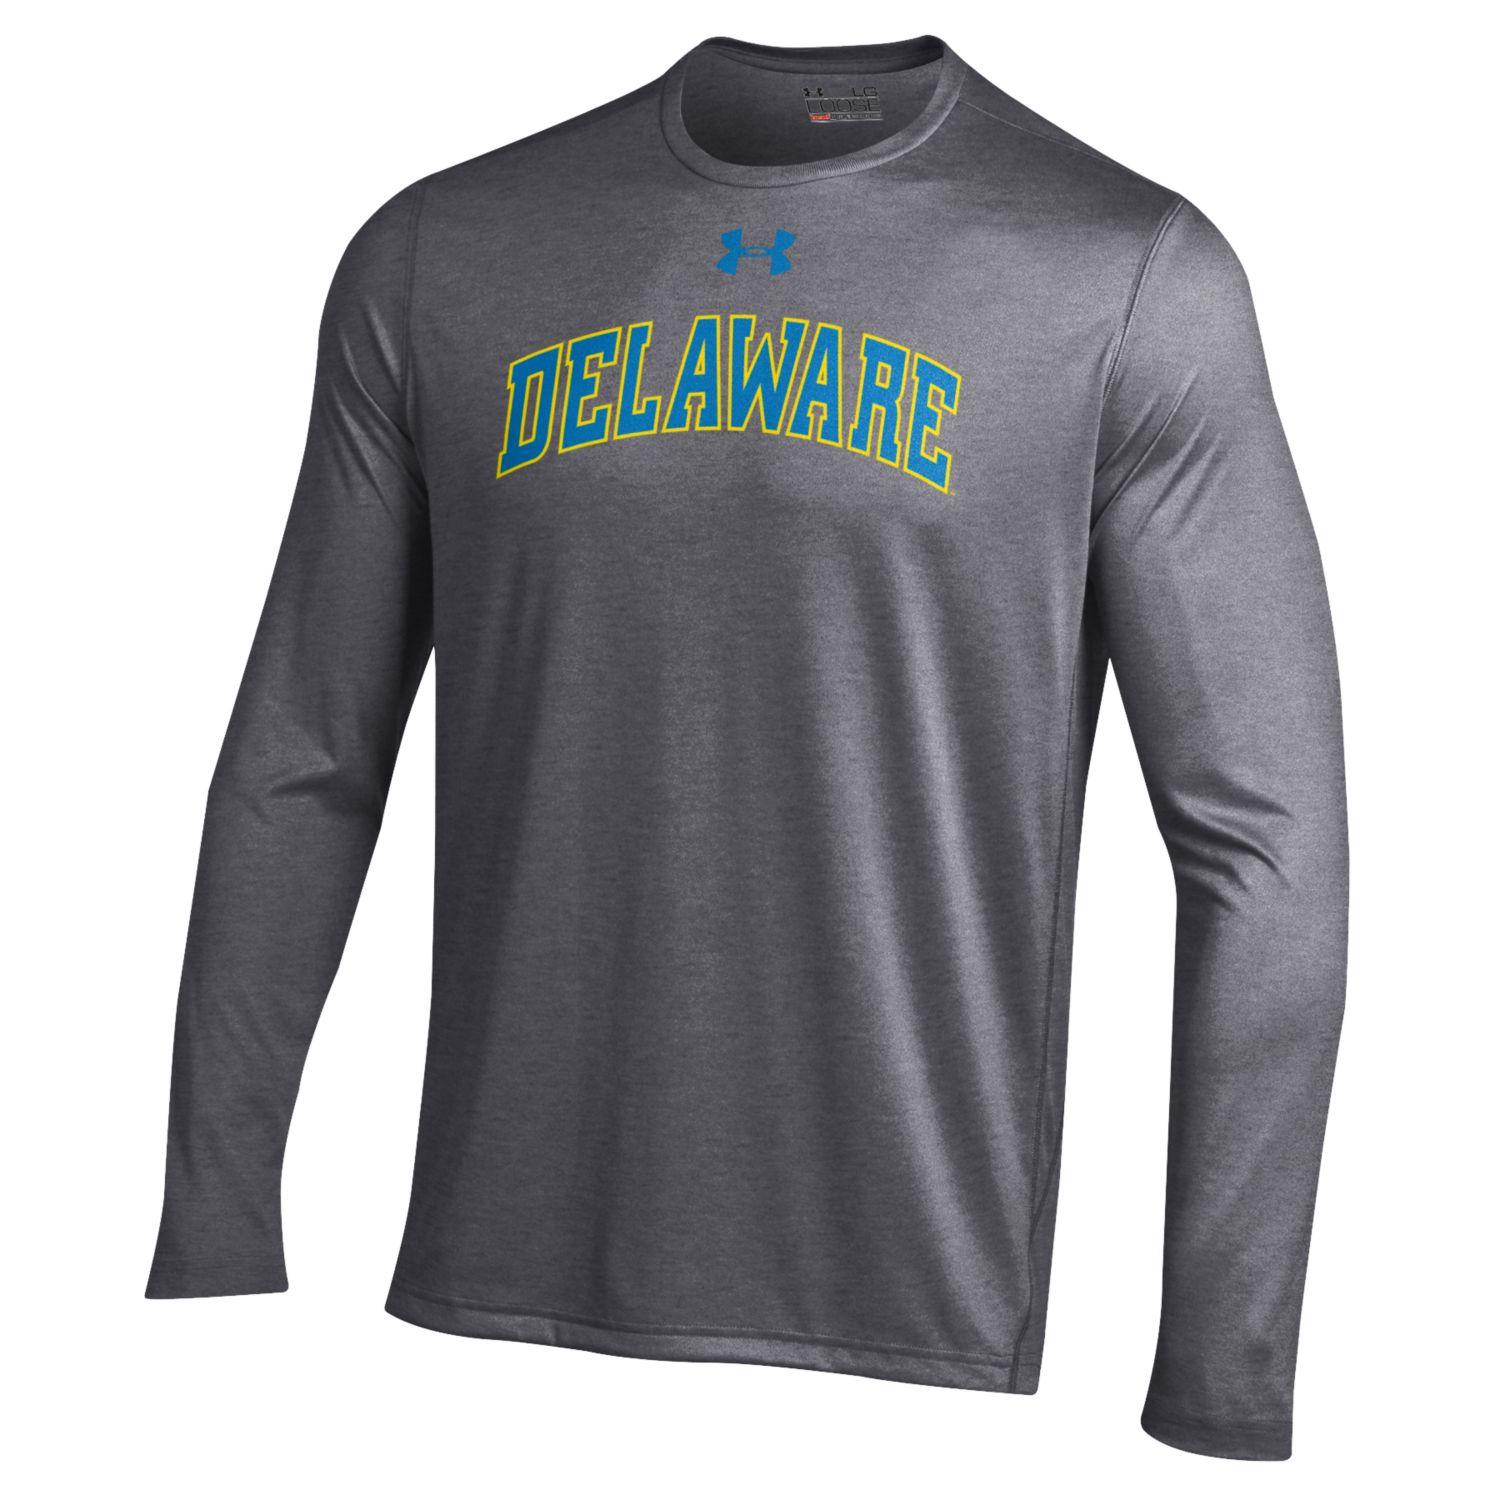 Instrument Consequent repertoire University of Delaware Under Armour L/S Performance T-shirt – Carbon –  National 5 and 10